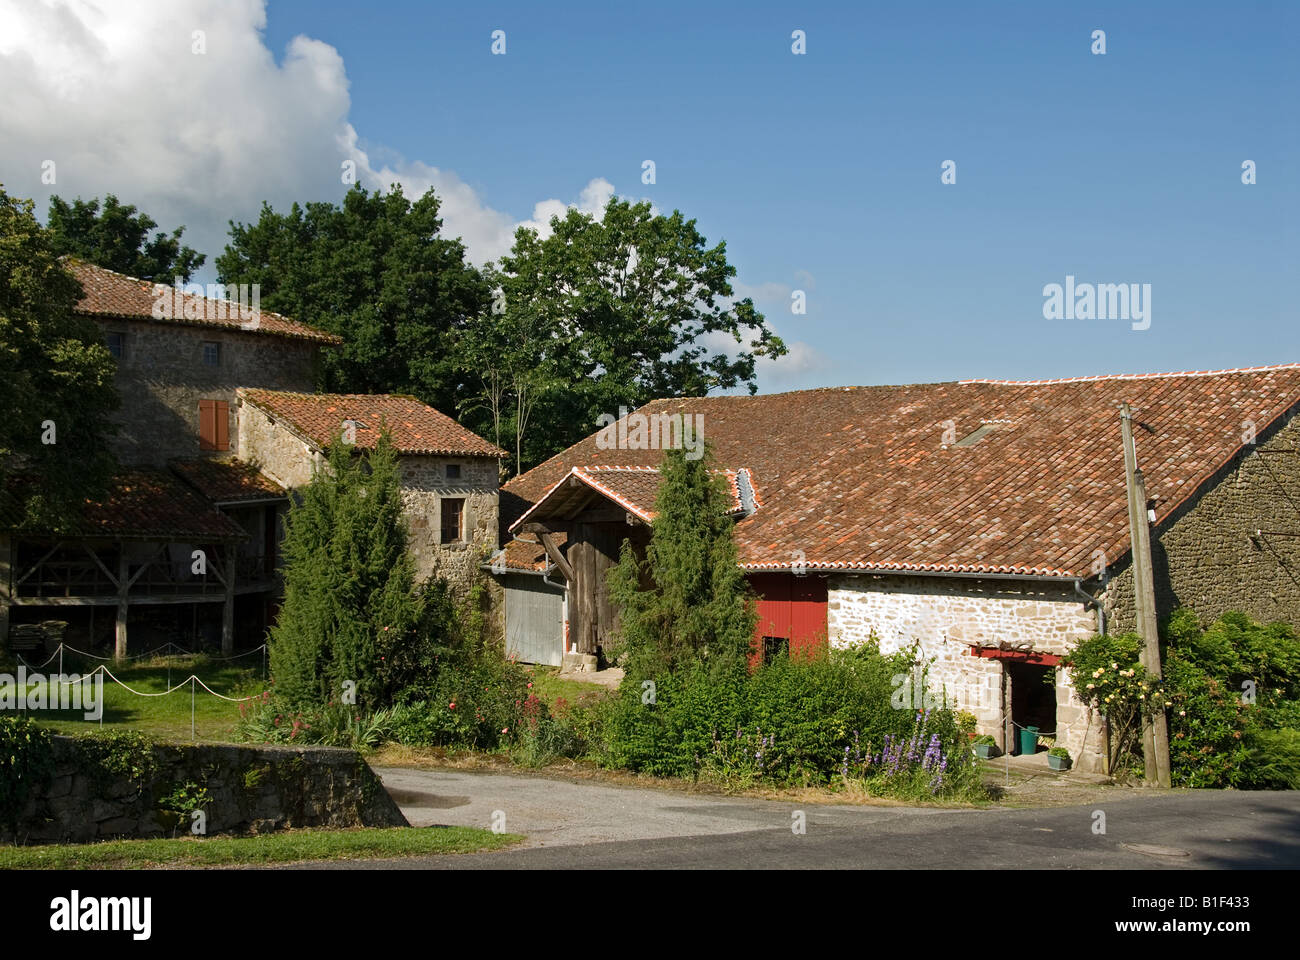 Stock photo of a house in the village of Montrol Senard Stock Photo